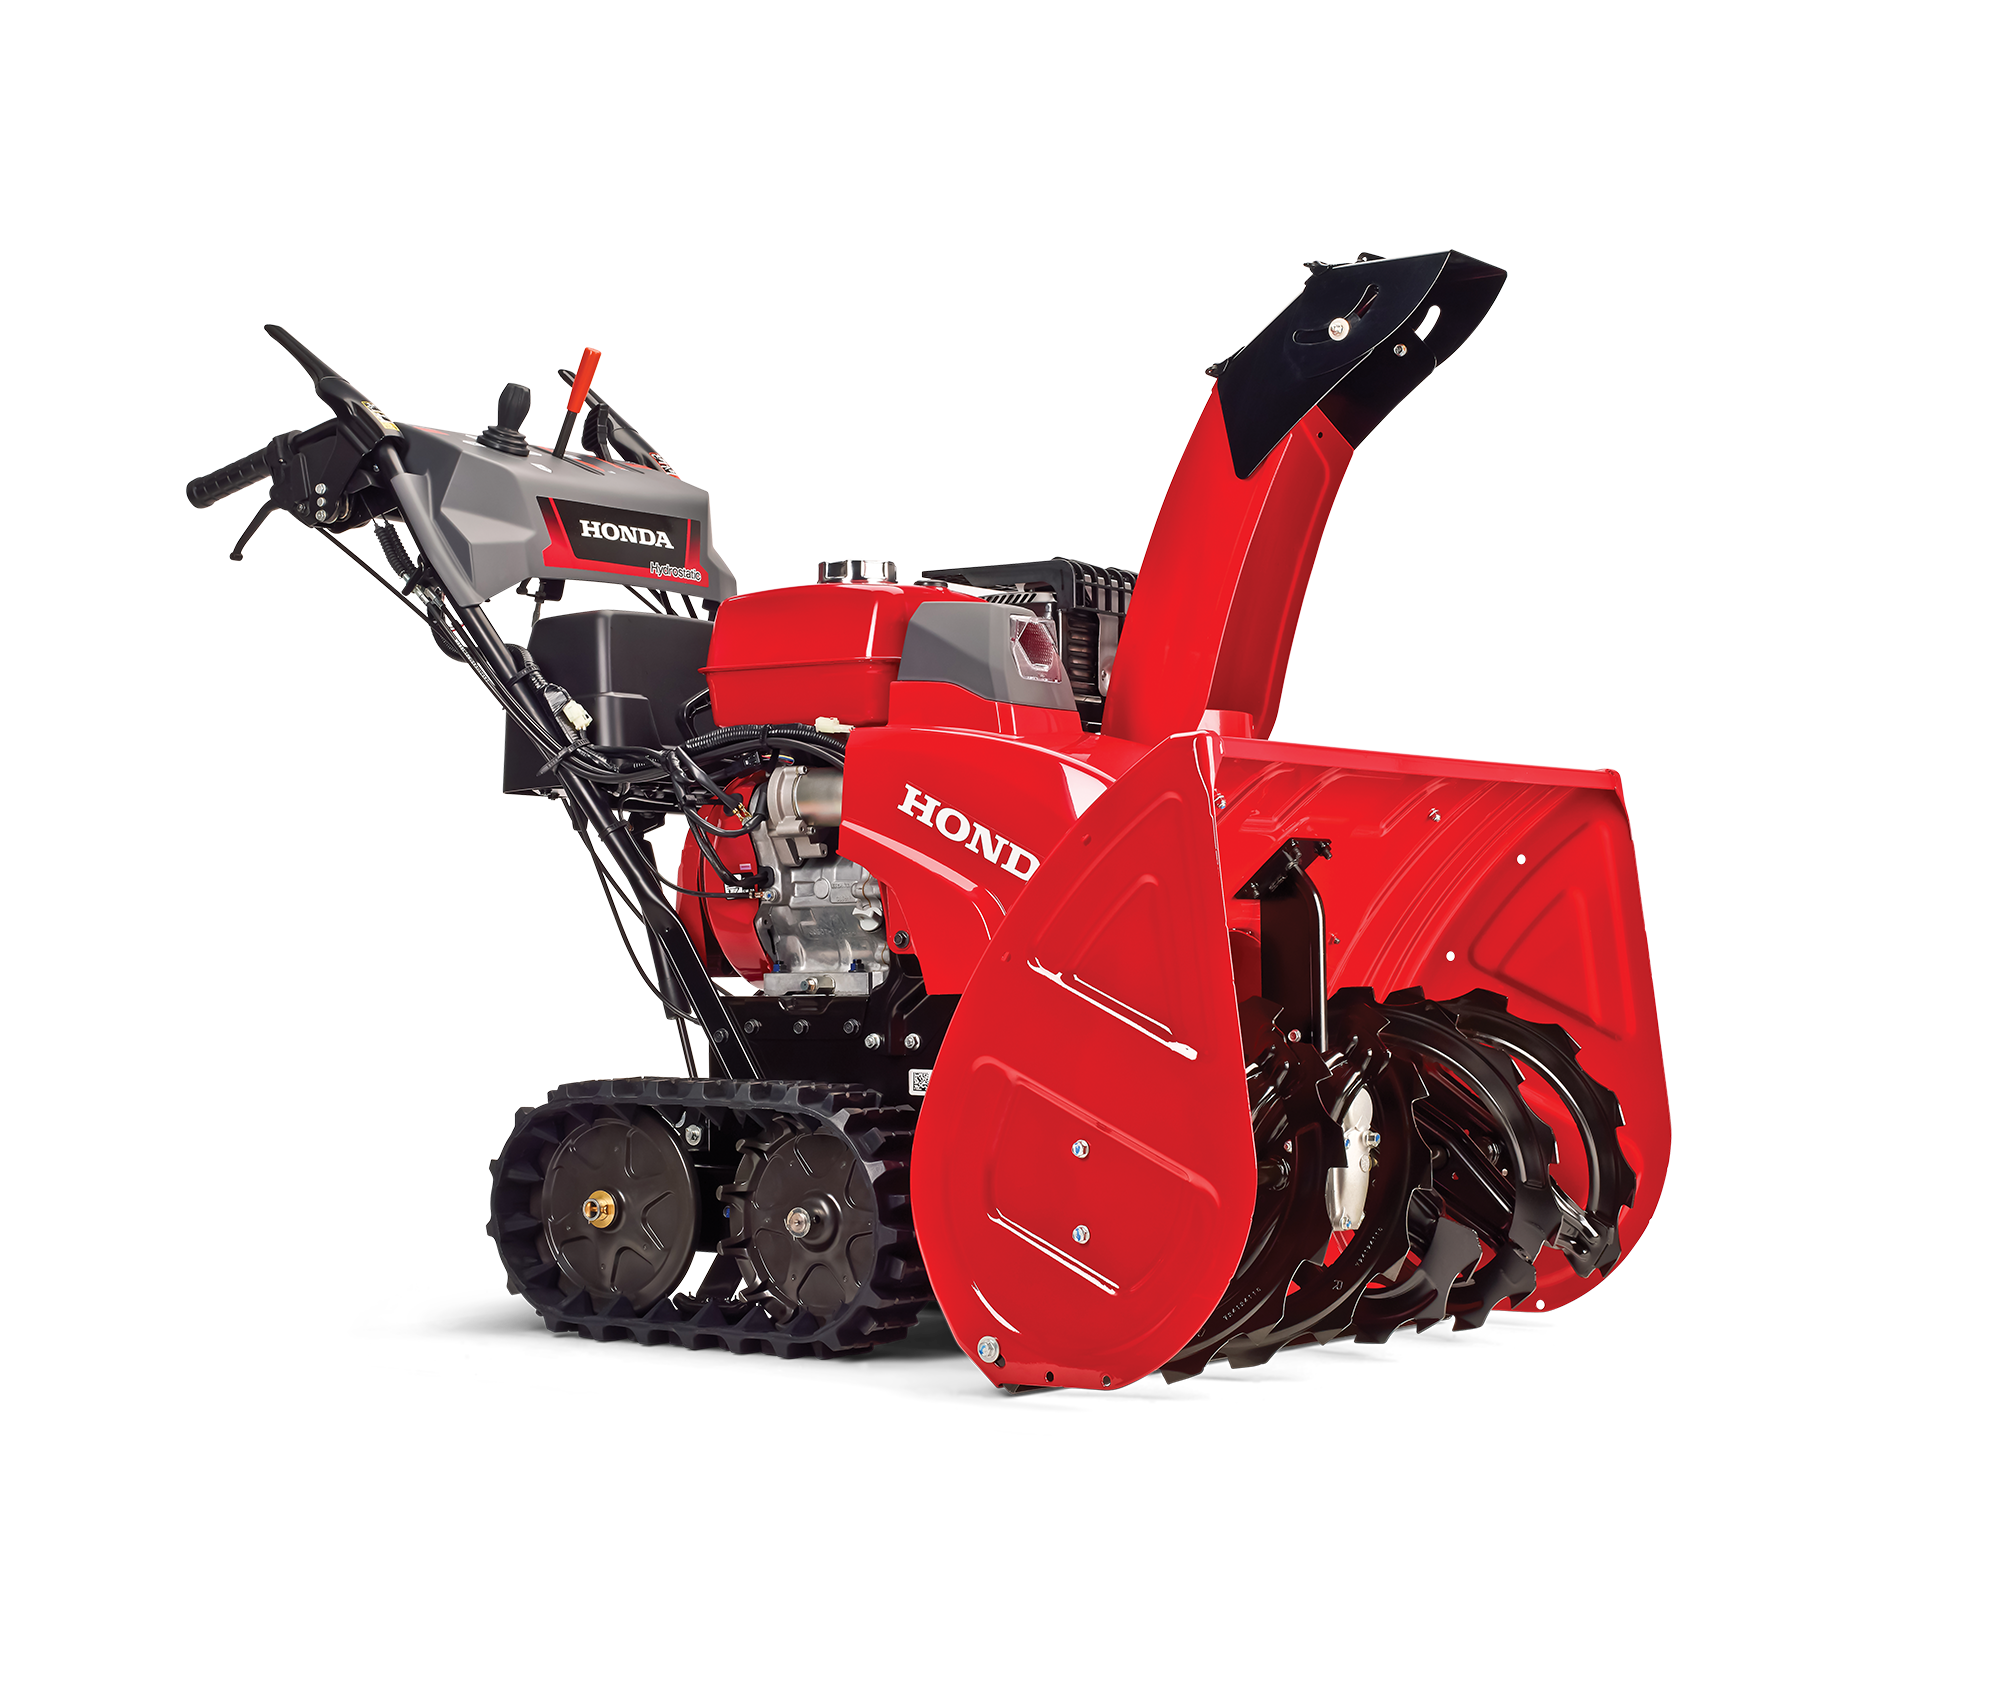 Image of the 32" Track-Drive ES Snowblower